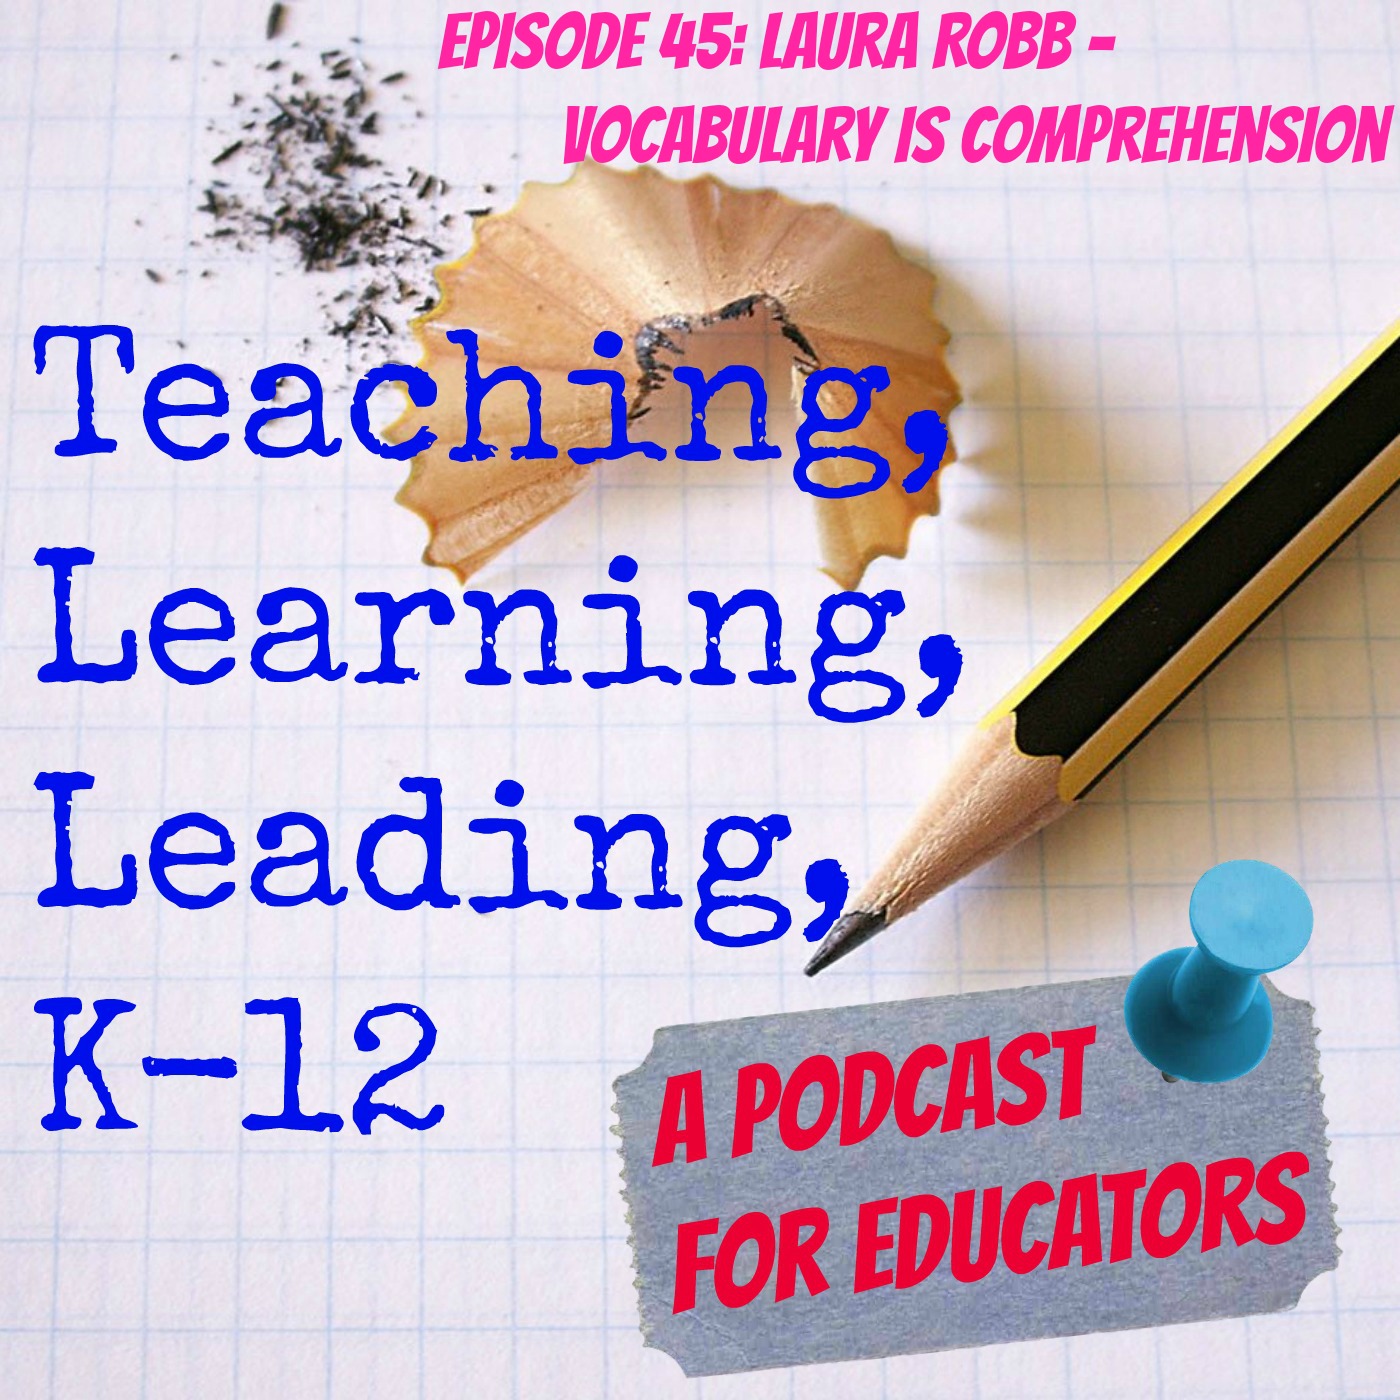 Episode 45: Laura Robb-Vocabulary is Comprehension